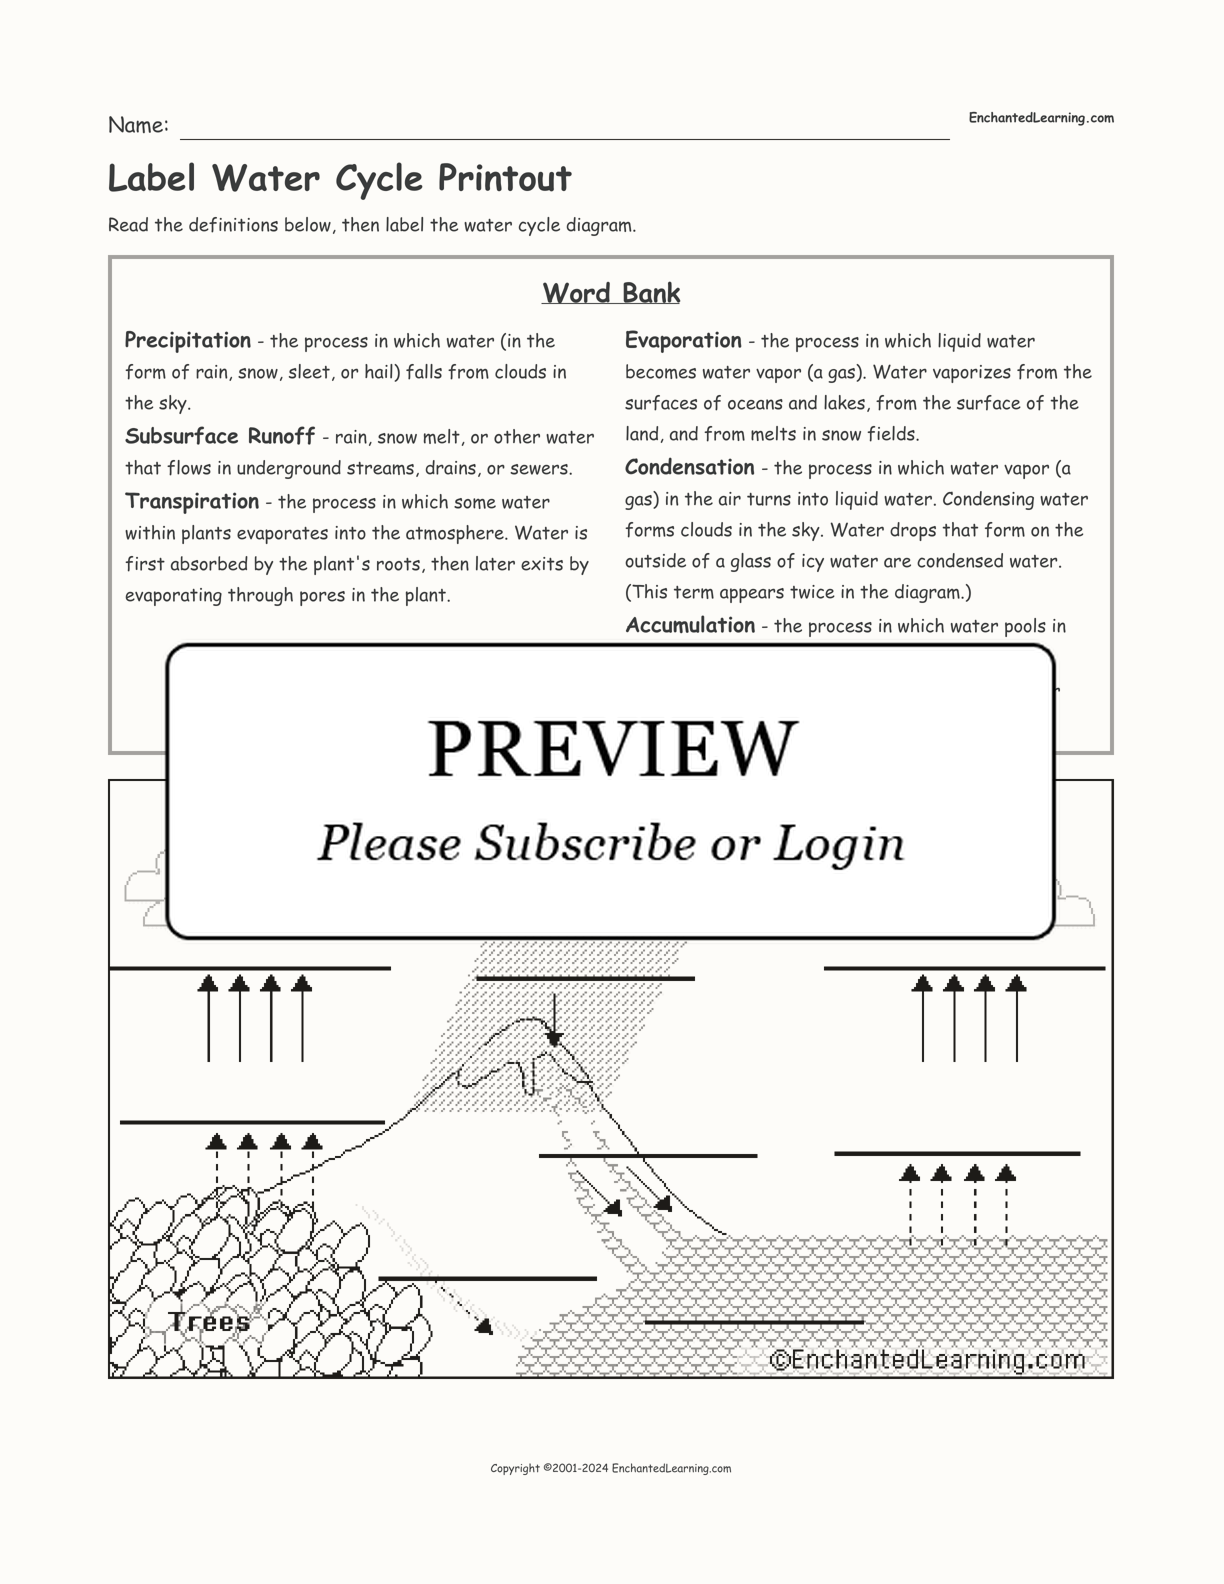 Label Water Cycle Printout interactive worksheet page 1